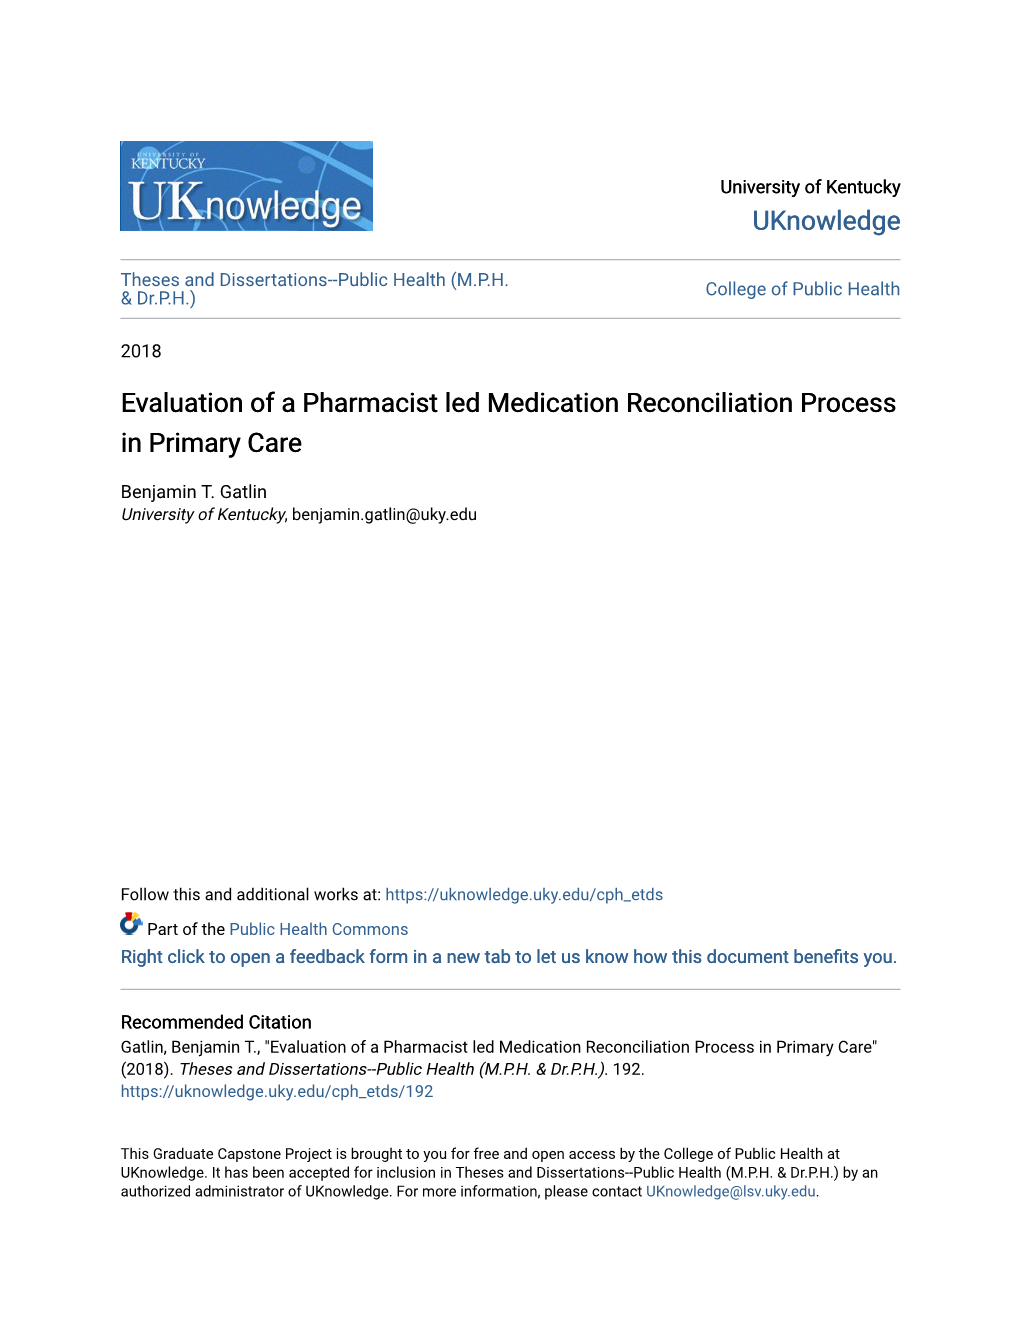 Evaluation of a Pharmacist Led Medication Reconciliation Process in Primary Care